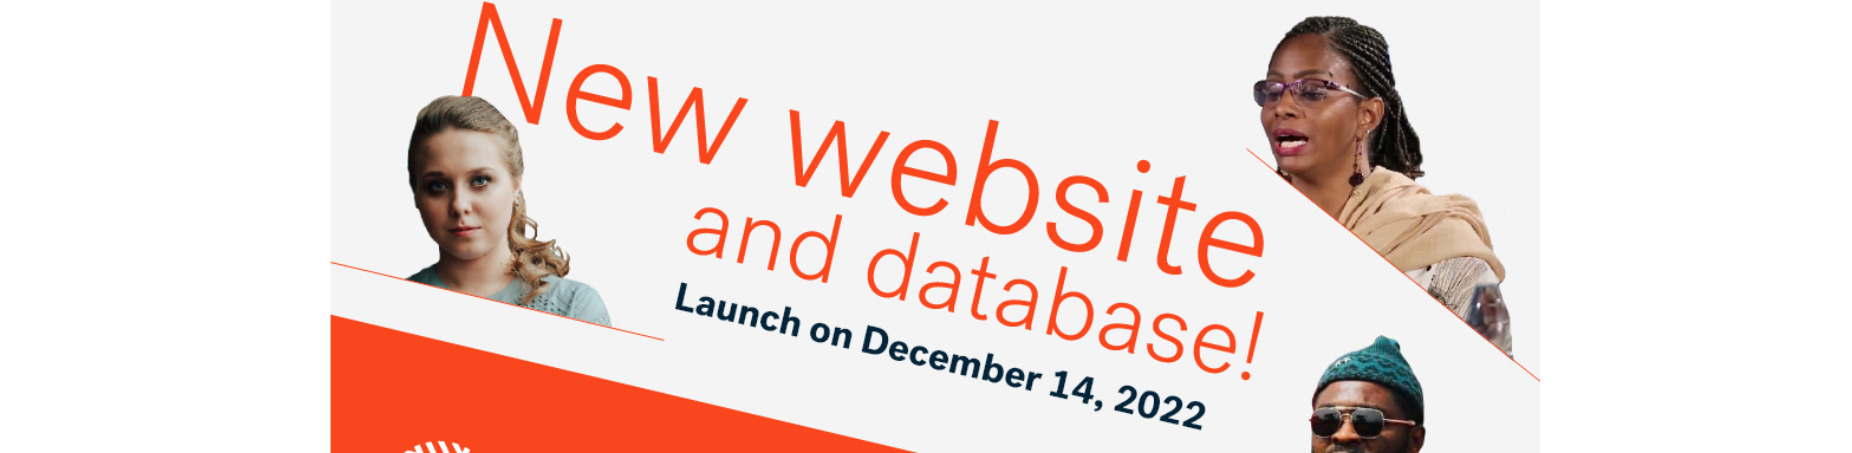 New website and database! Launch on December 14, 2022